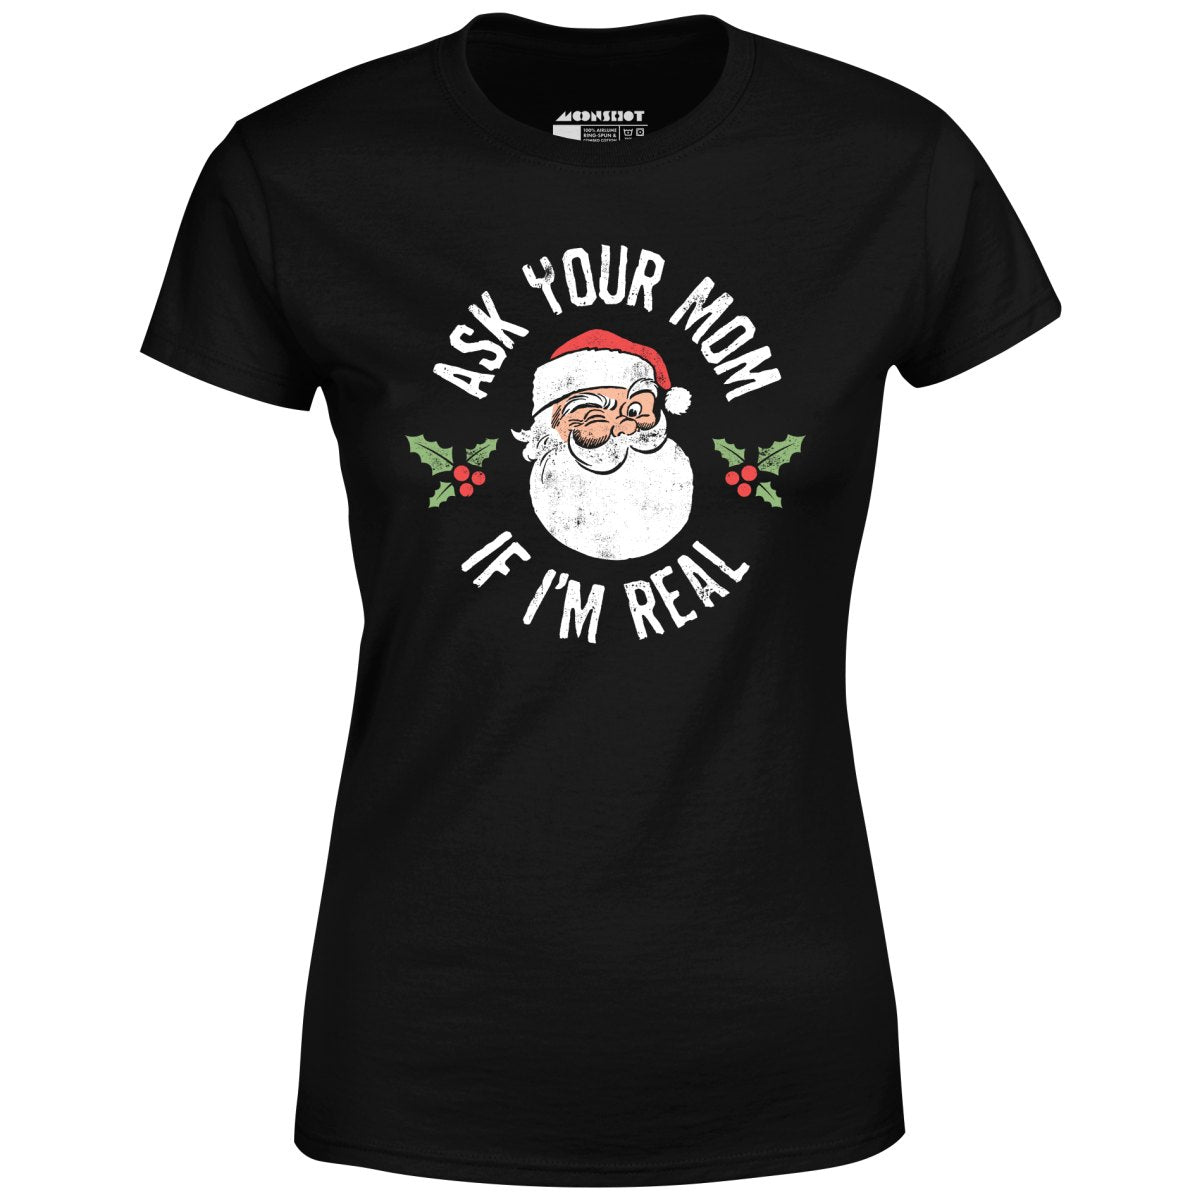 Ask Your Mom if I'm Real - Women's T-Shirt